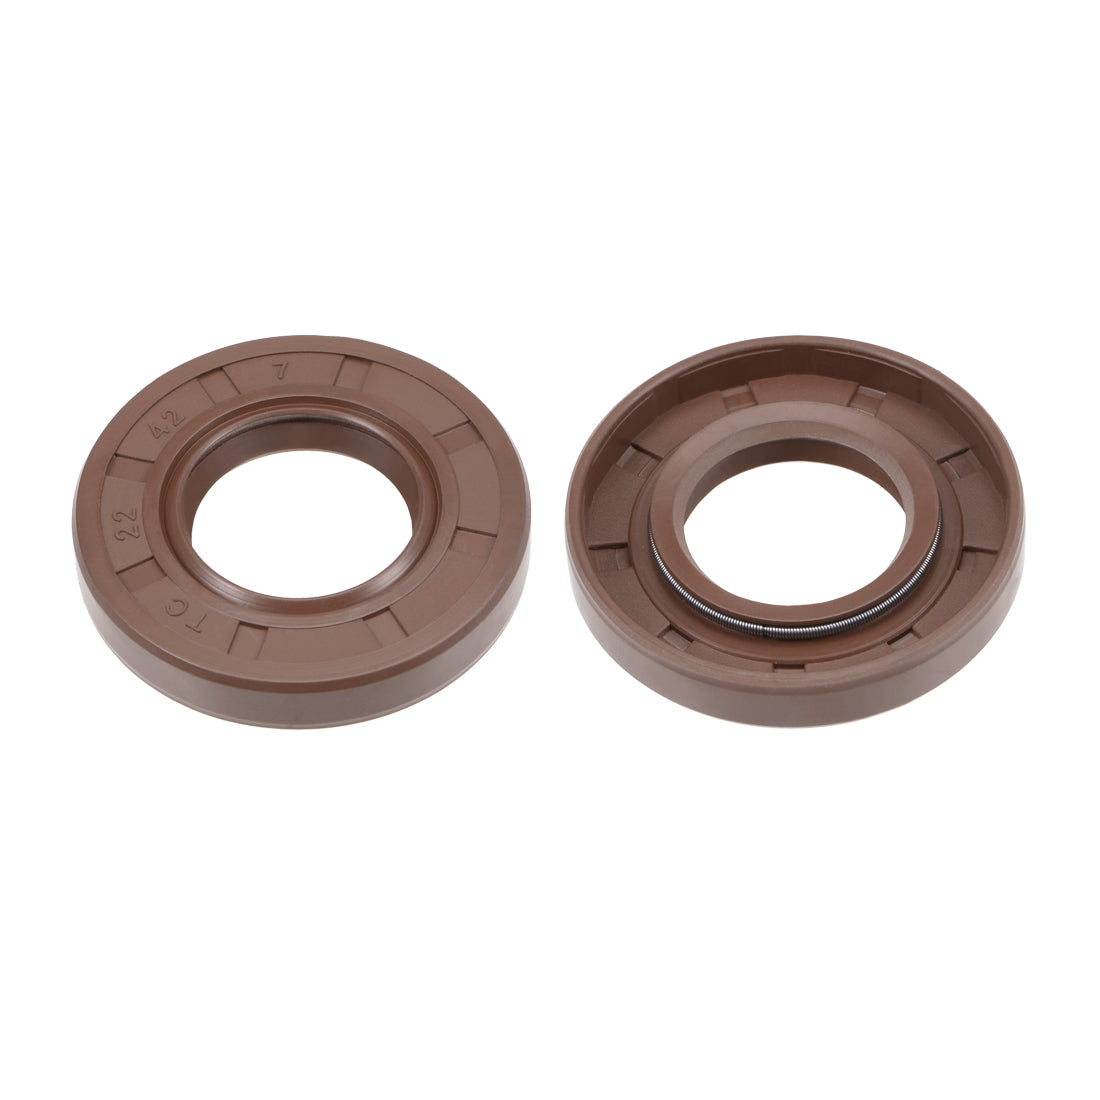 uxcell Uxcell Oil Seal 22mm Inner Dia 42mm OD 7mm Thick Fluorine Rubber Double Lip Seals 2Pcs